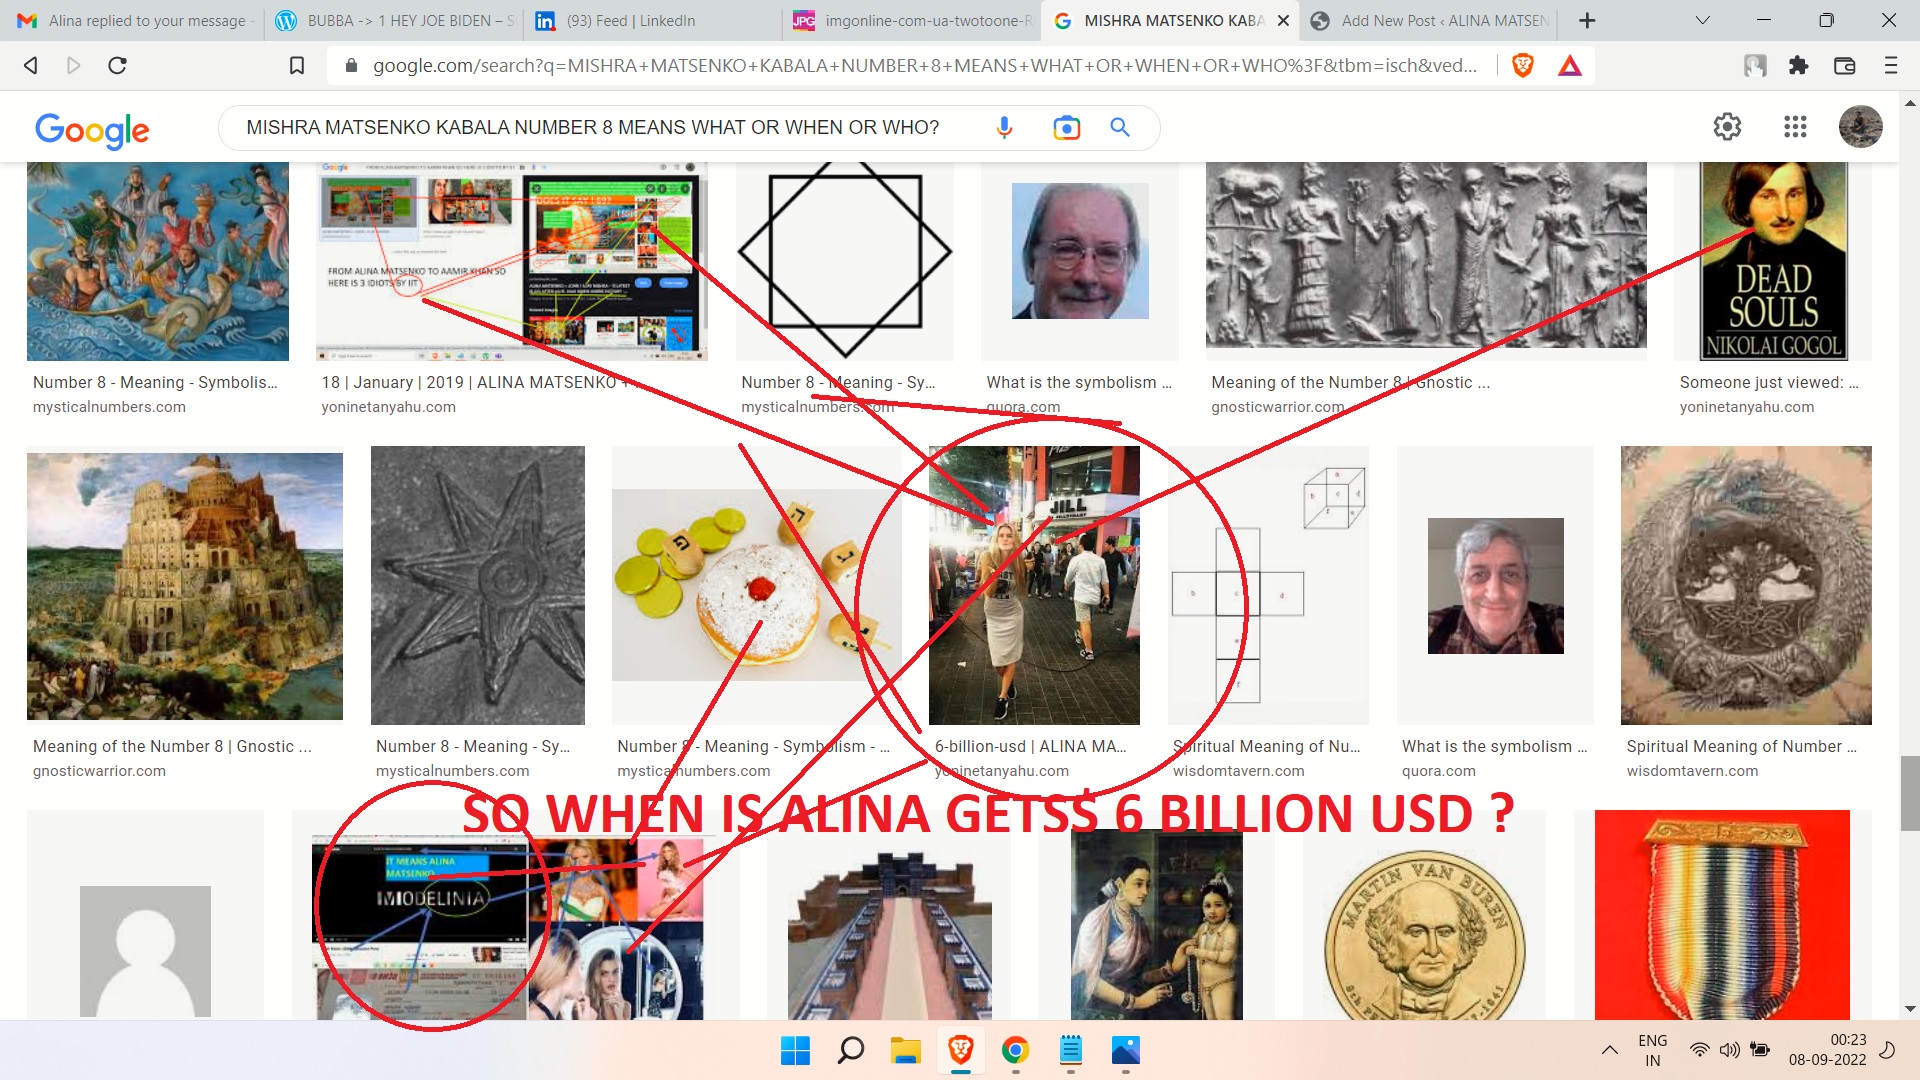 MISHRA MATSENKO KABALA NUMBER 8 MEANS WHAT OR WHEN OR WHO - JOE BIDEN IS JEW OR FUNNY ----WOW SPEIL ERG AND SNAJAY DUTT AND BIBI NETANAYHU AND CLINTONS... WOW $ 6 BILLION USD